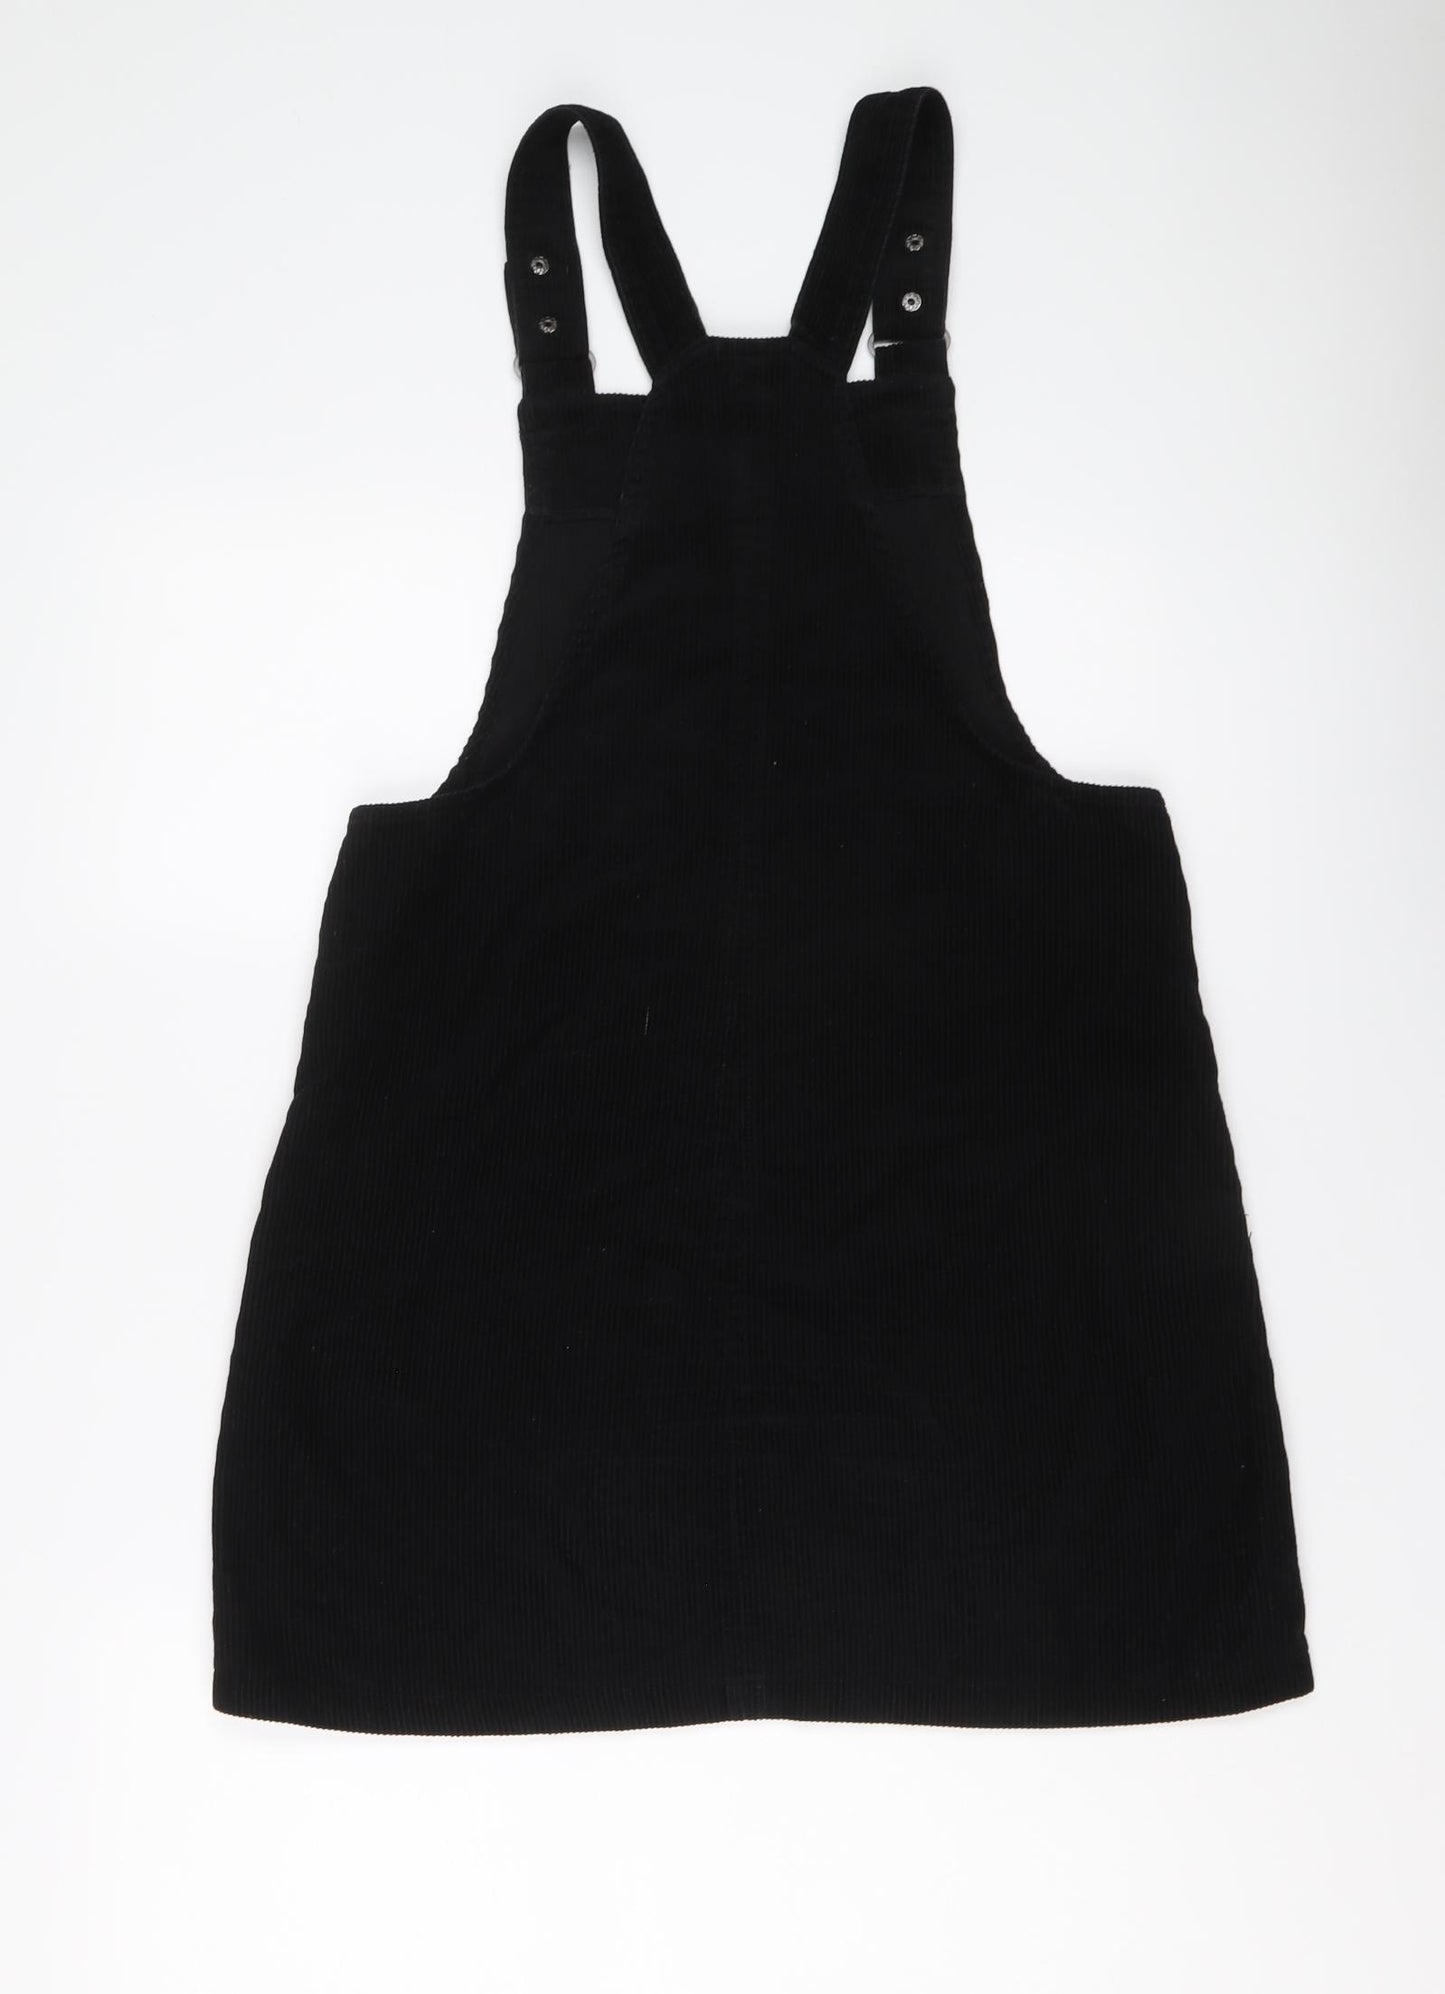 New Look Womens Black Cotton Pinafore/Dungaree Dress Size 10 Square Neck Button